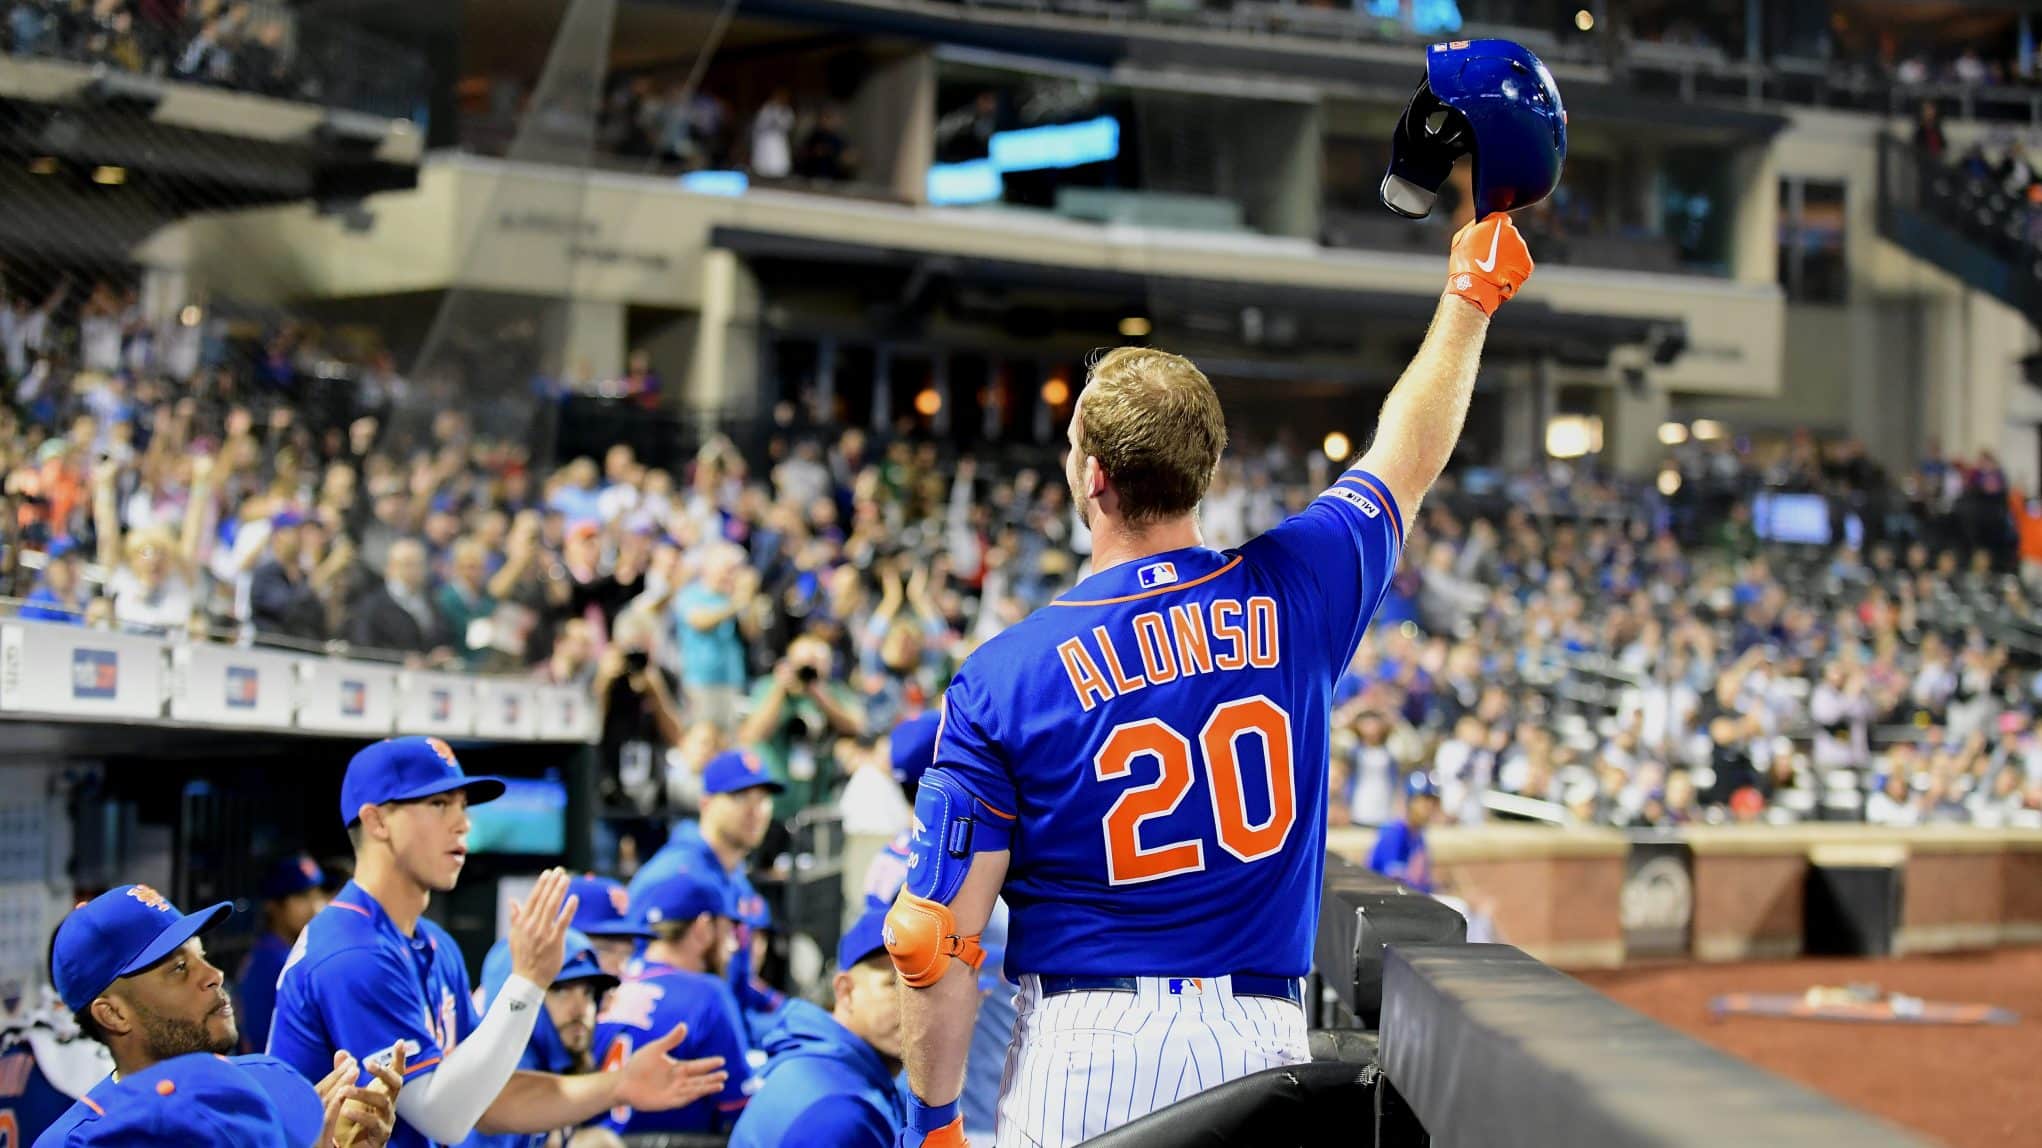 pete alonso mets home run derby